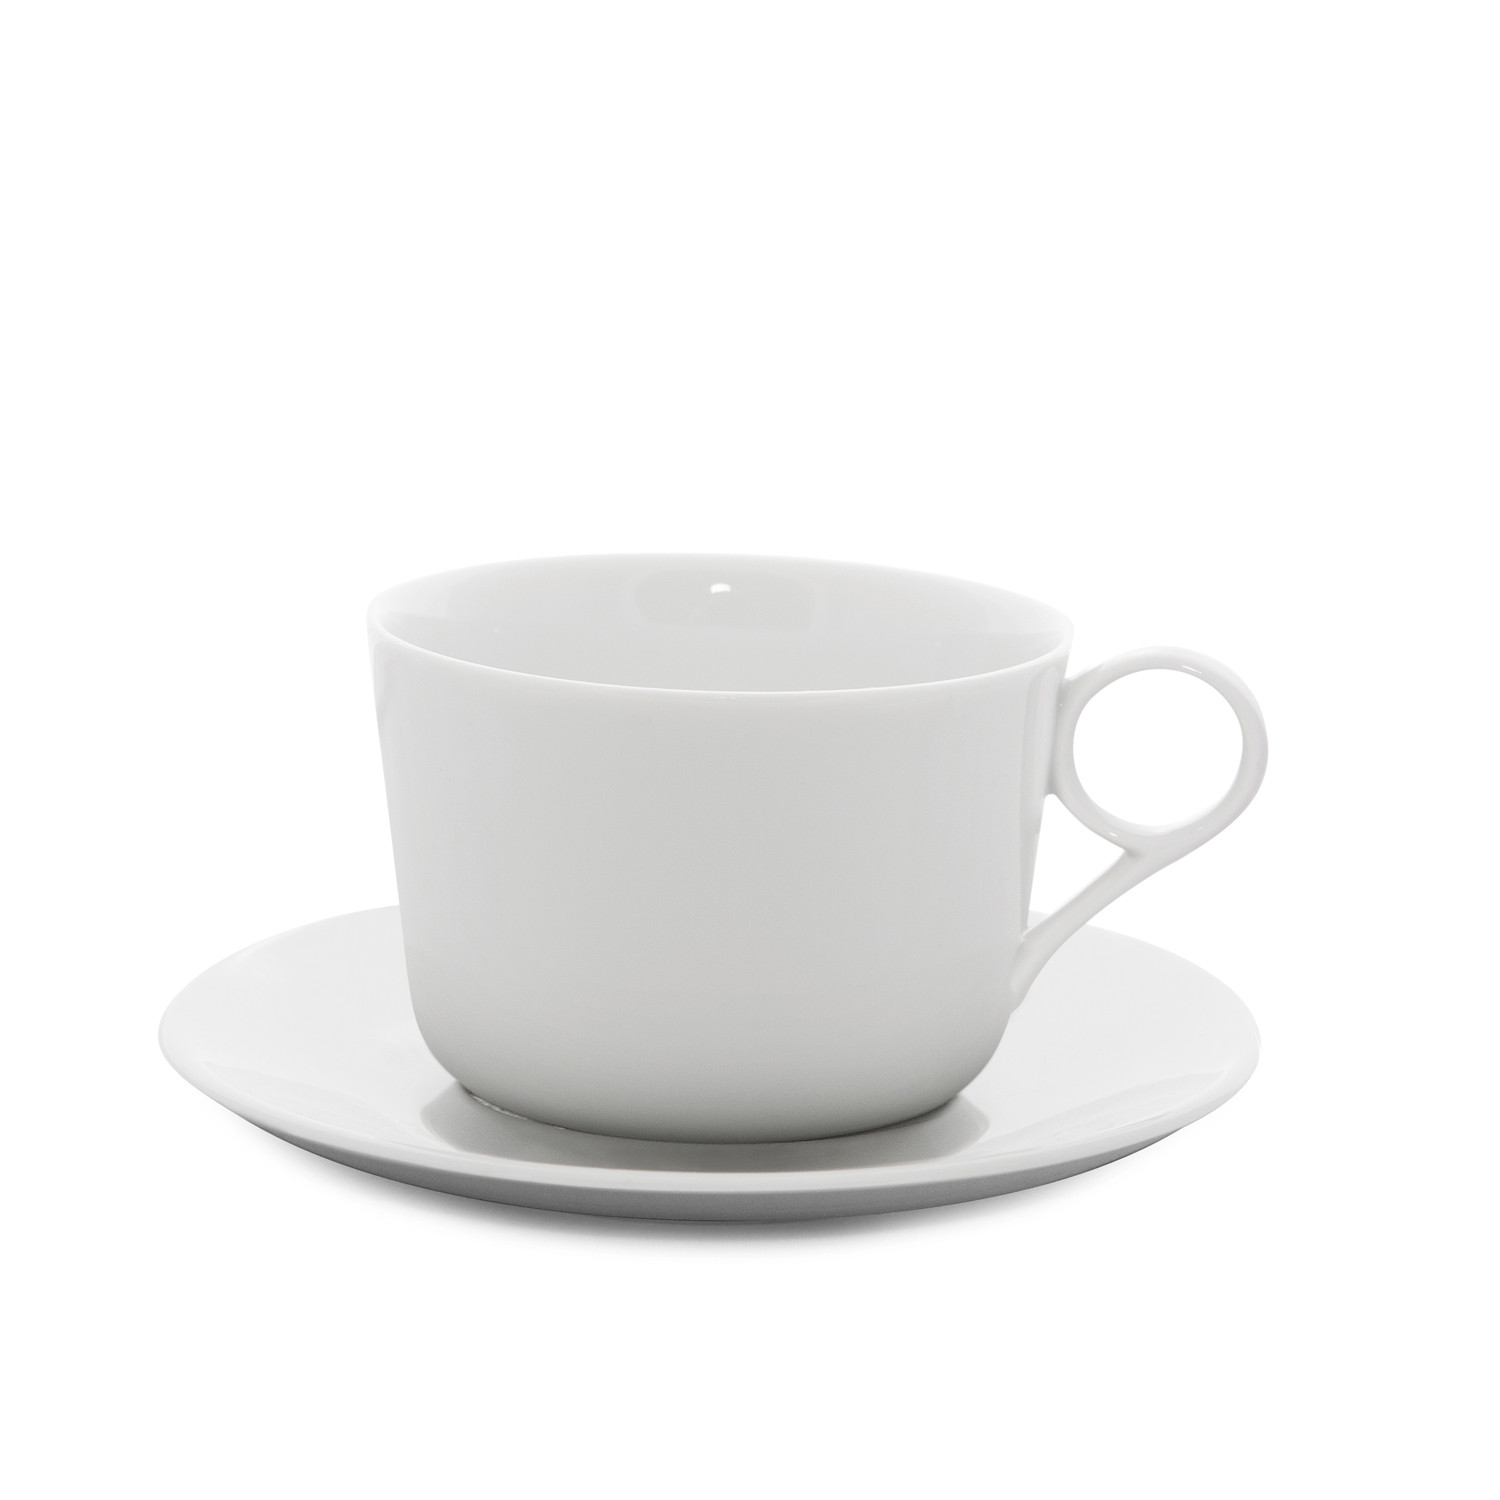 Me Coffee Cup // White (Large, 8.3 oz) - LADP - Touch of Modern